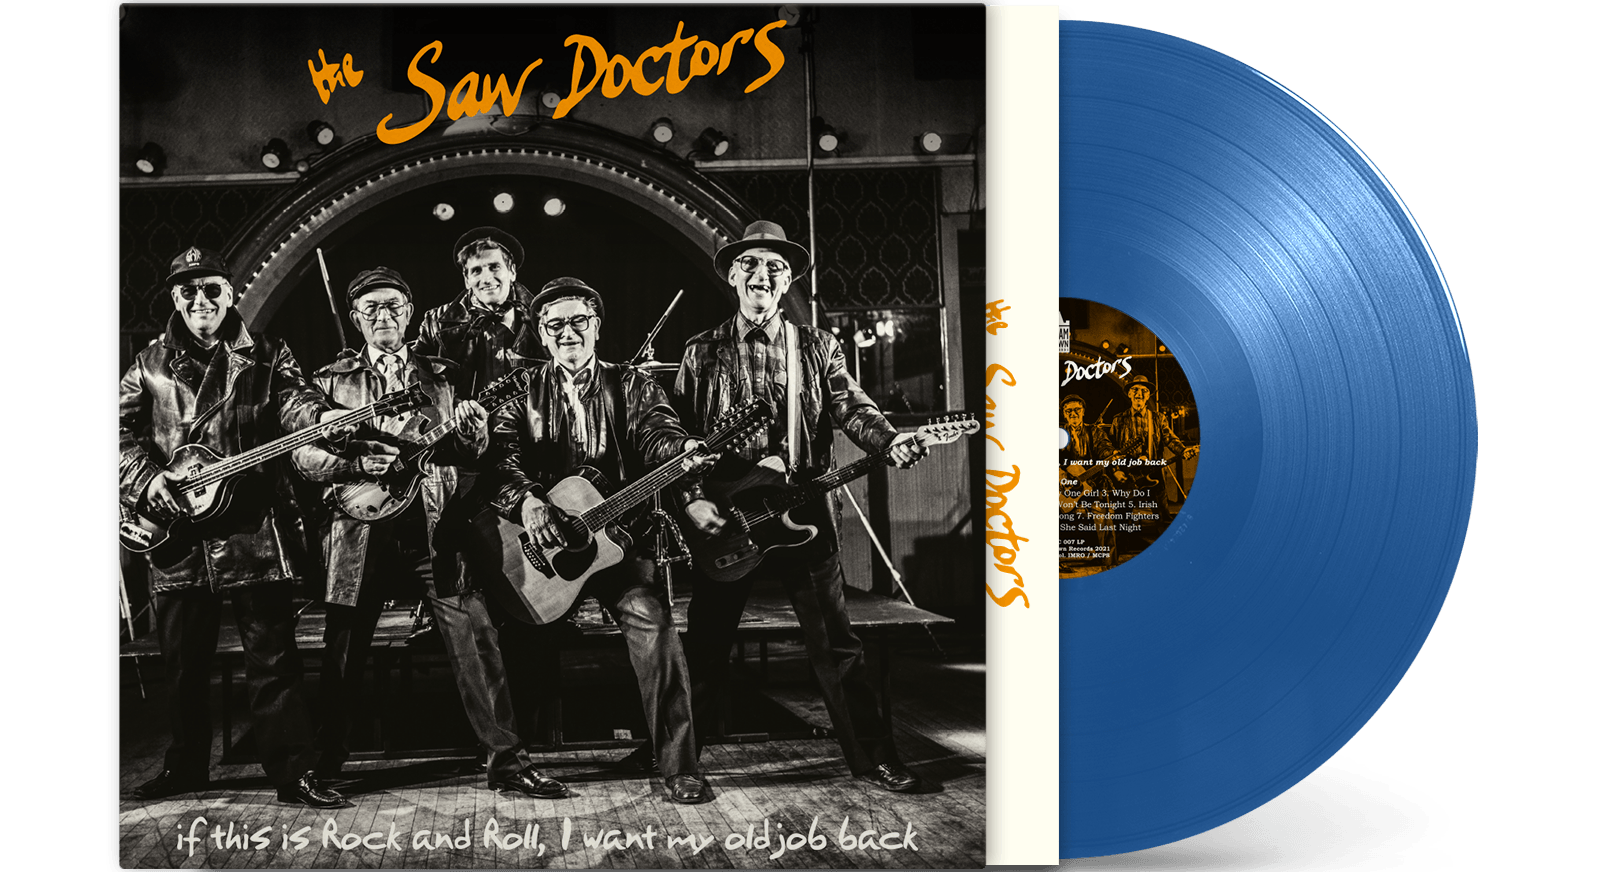 The Saw Doctors - If This Is Rock and Roll, I Want My Old Job Back